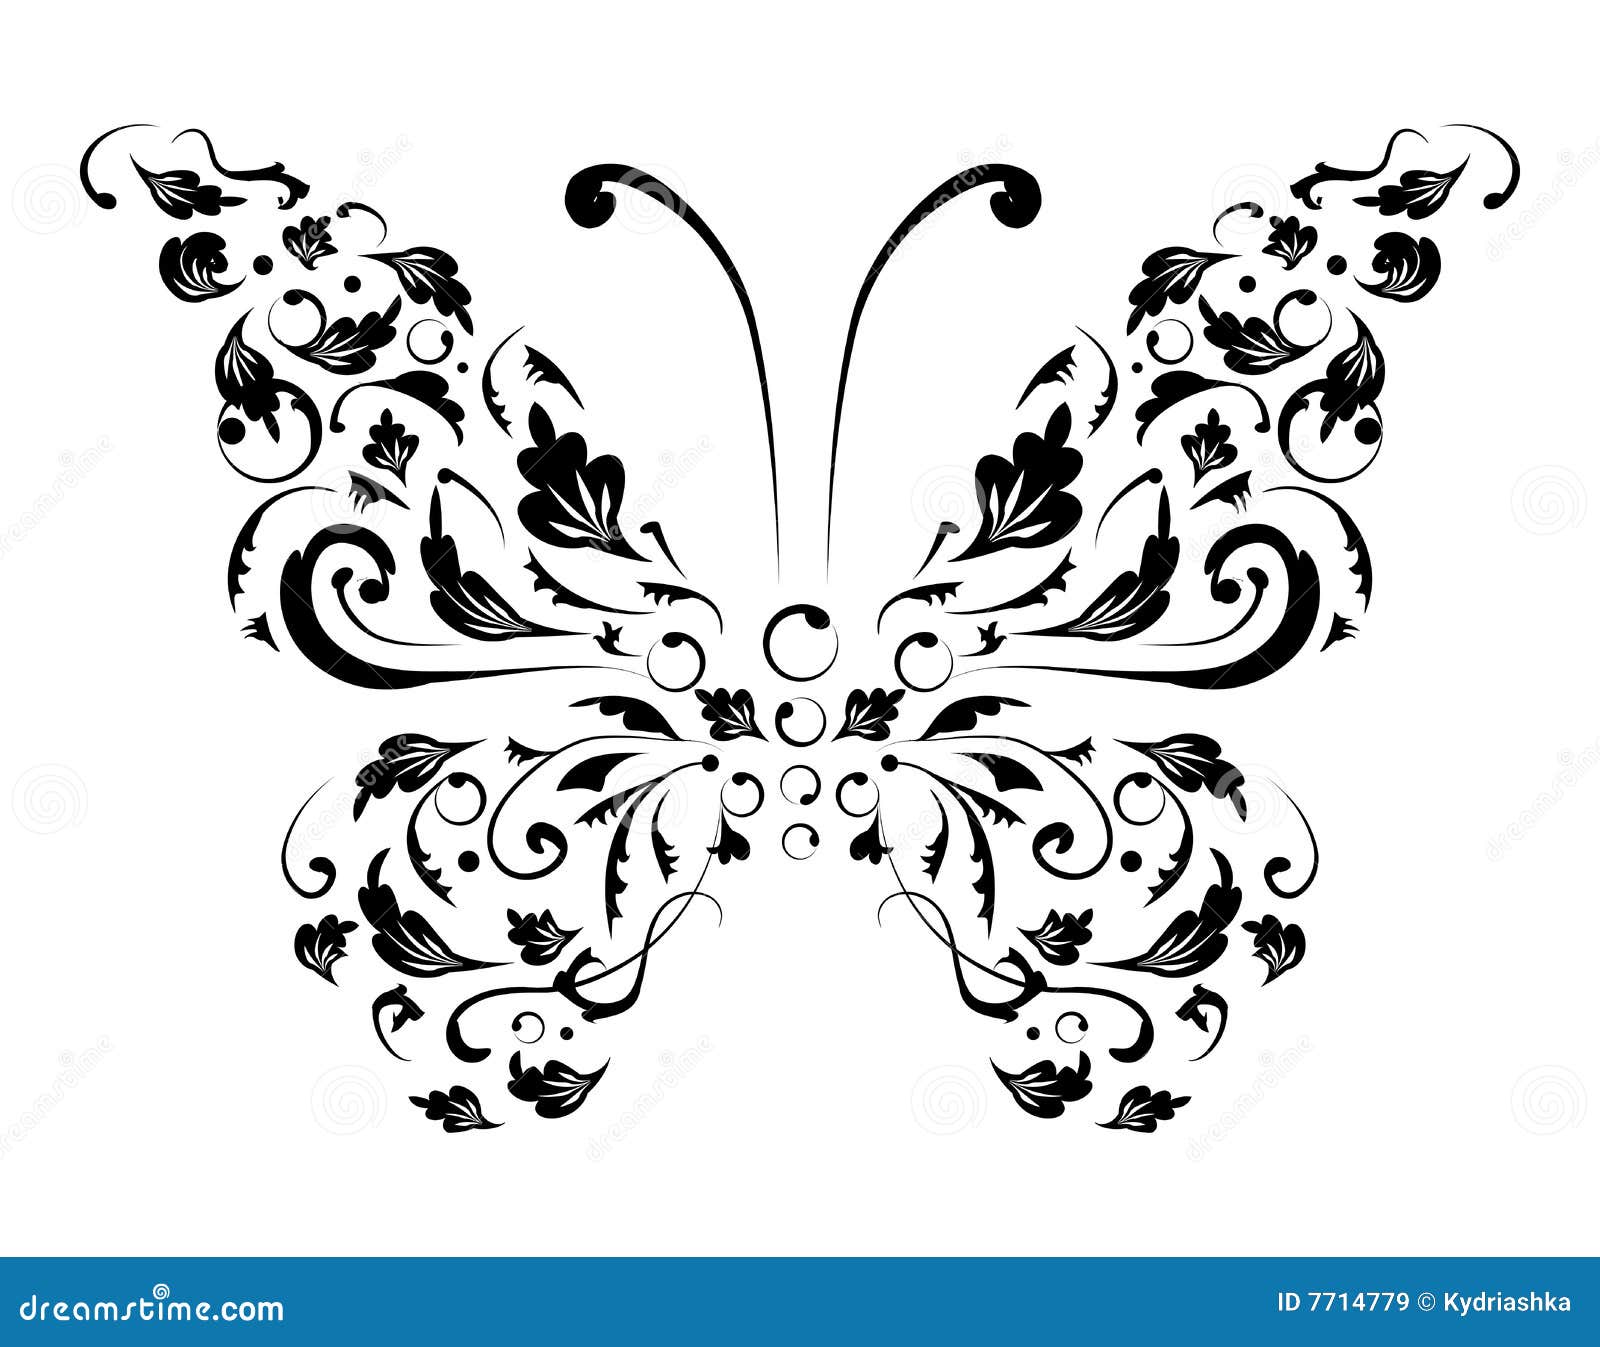 Download Butterfly Silhouette For You Design Stock Vector ...